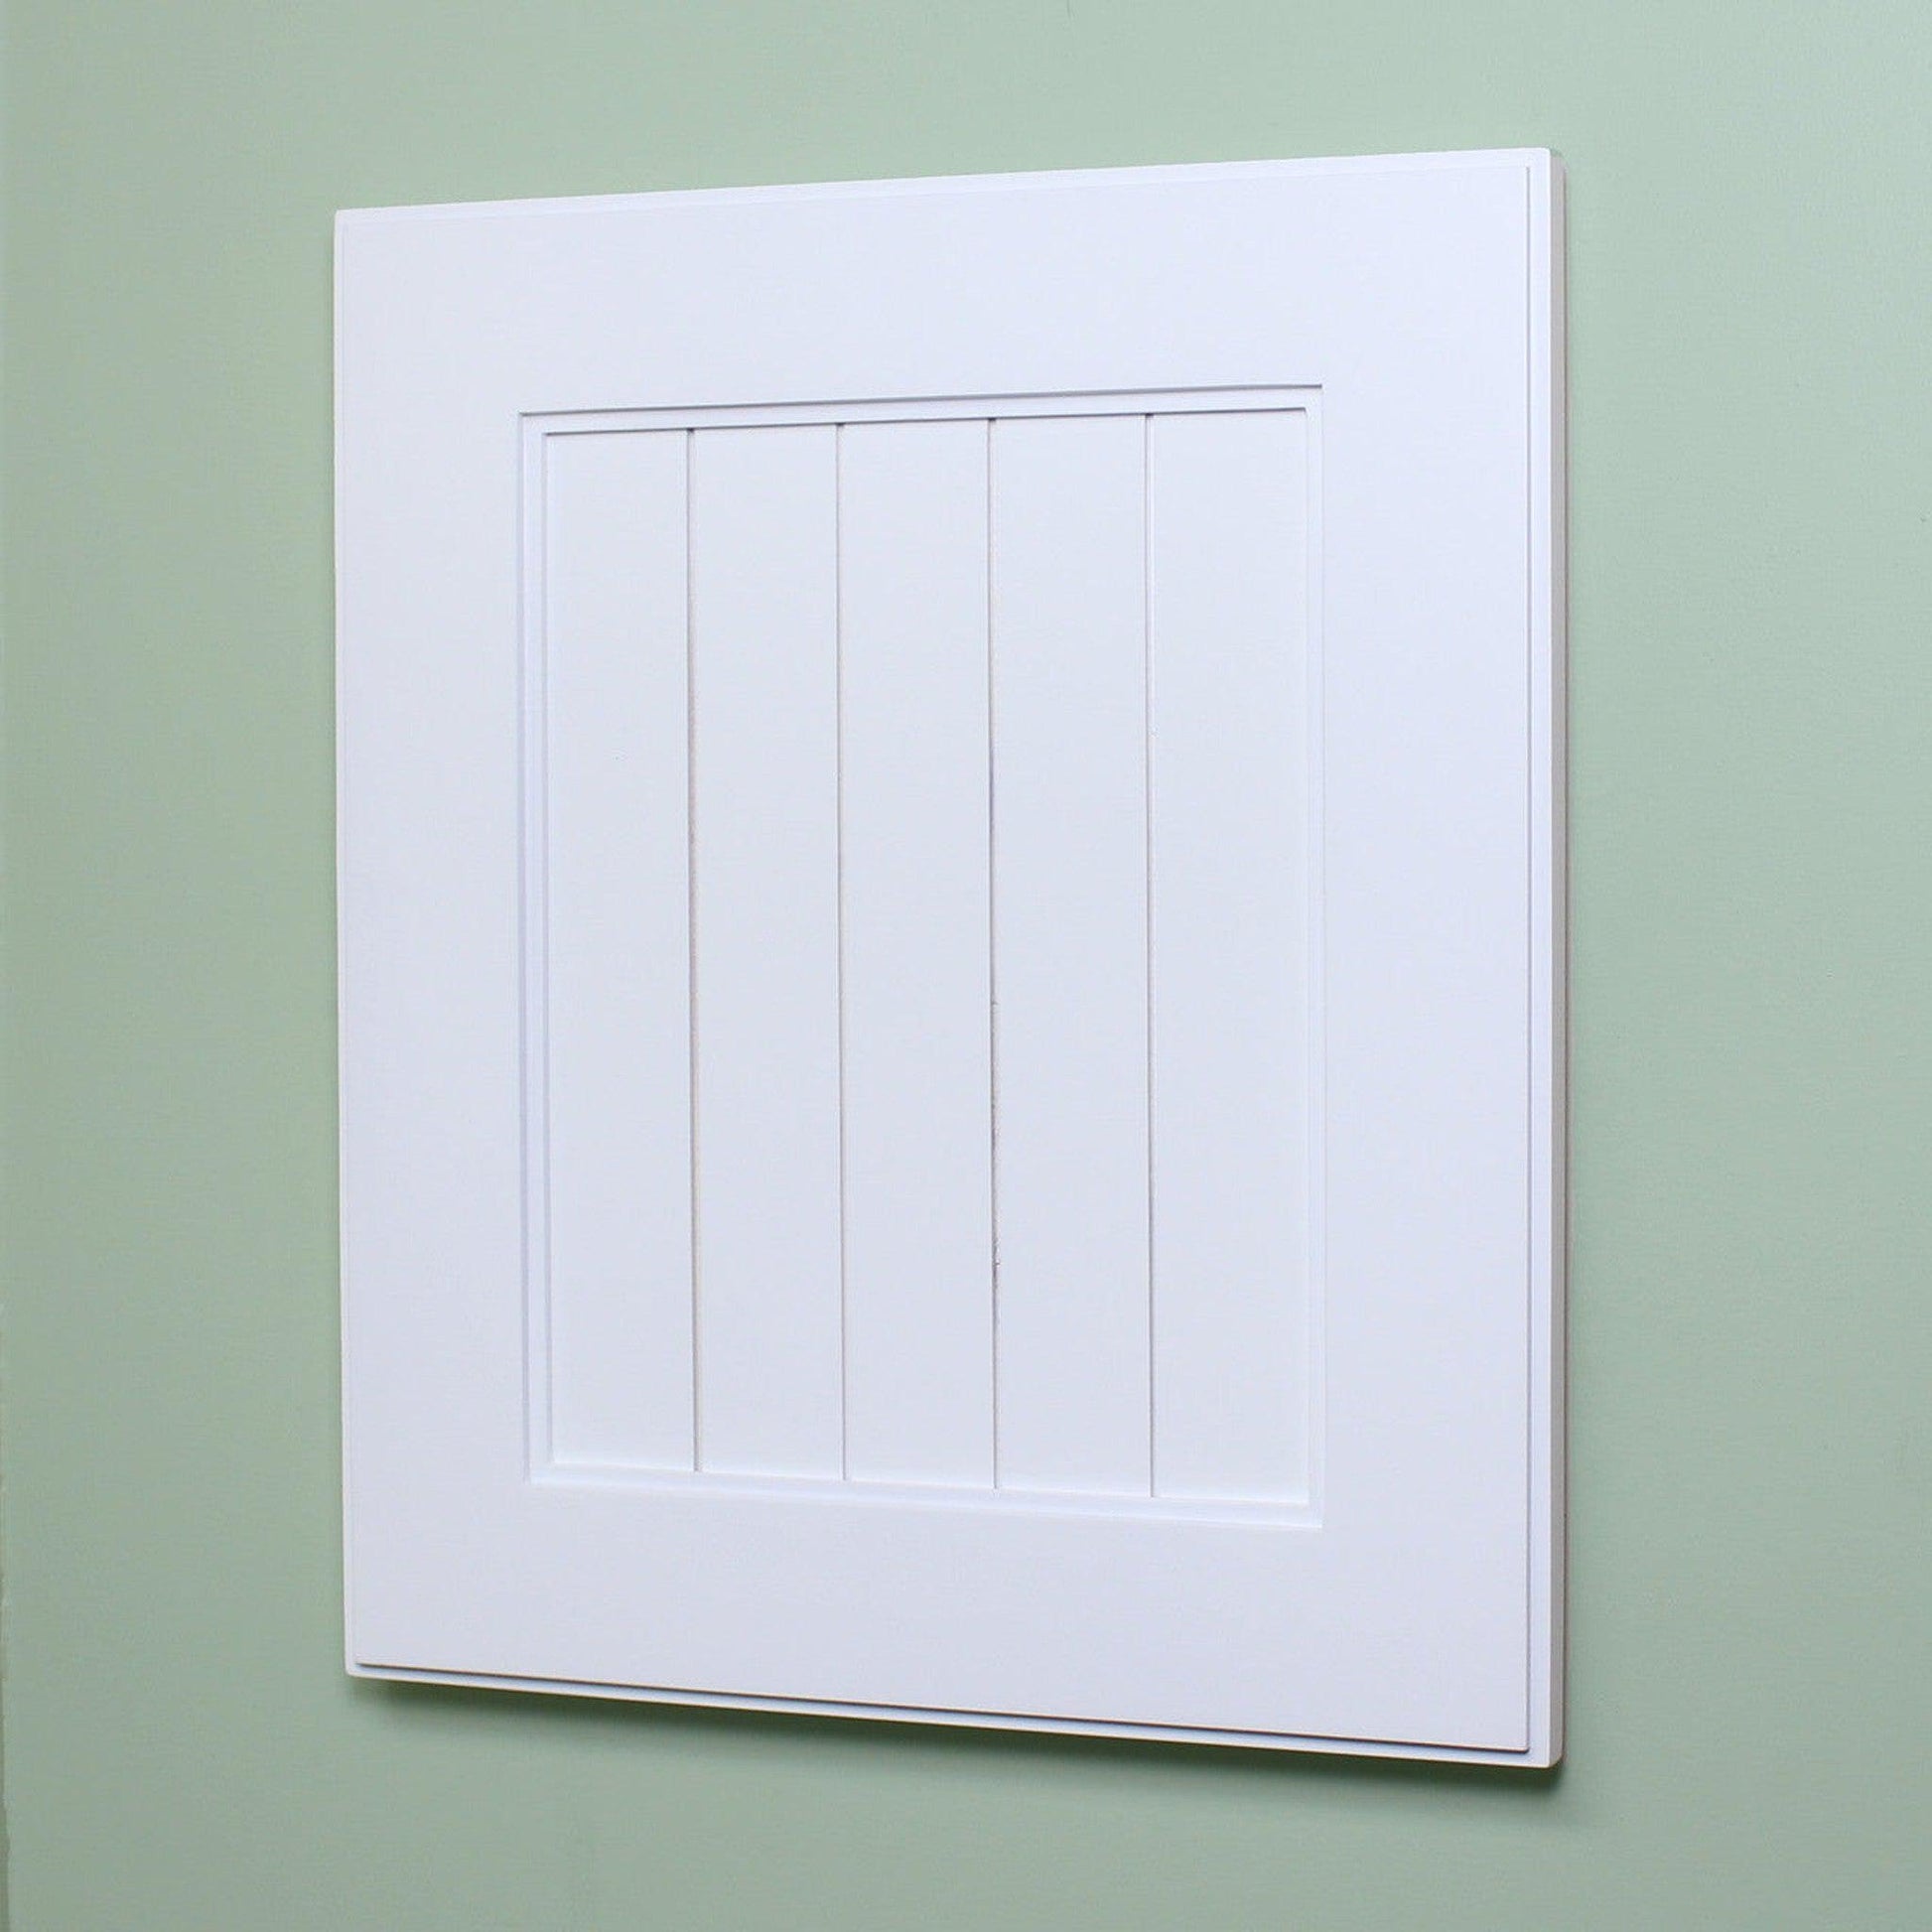 Fox Hollow Furnishings 14" x 18" White Shaker Beadboard White Interior Special 3" Depth Recessed Medicine Cabinet With Mirror